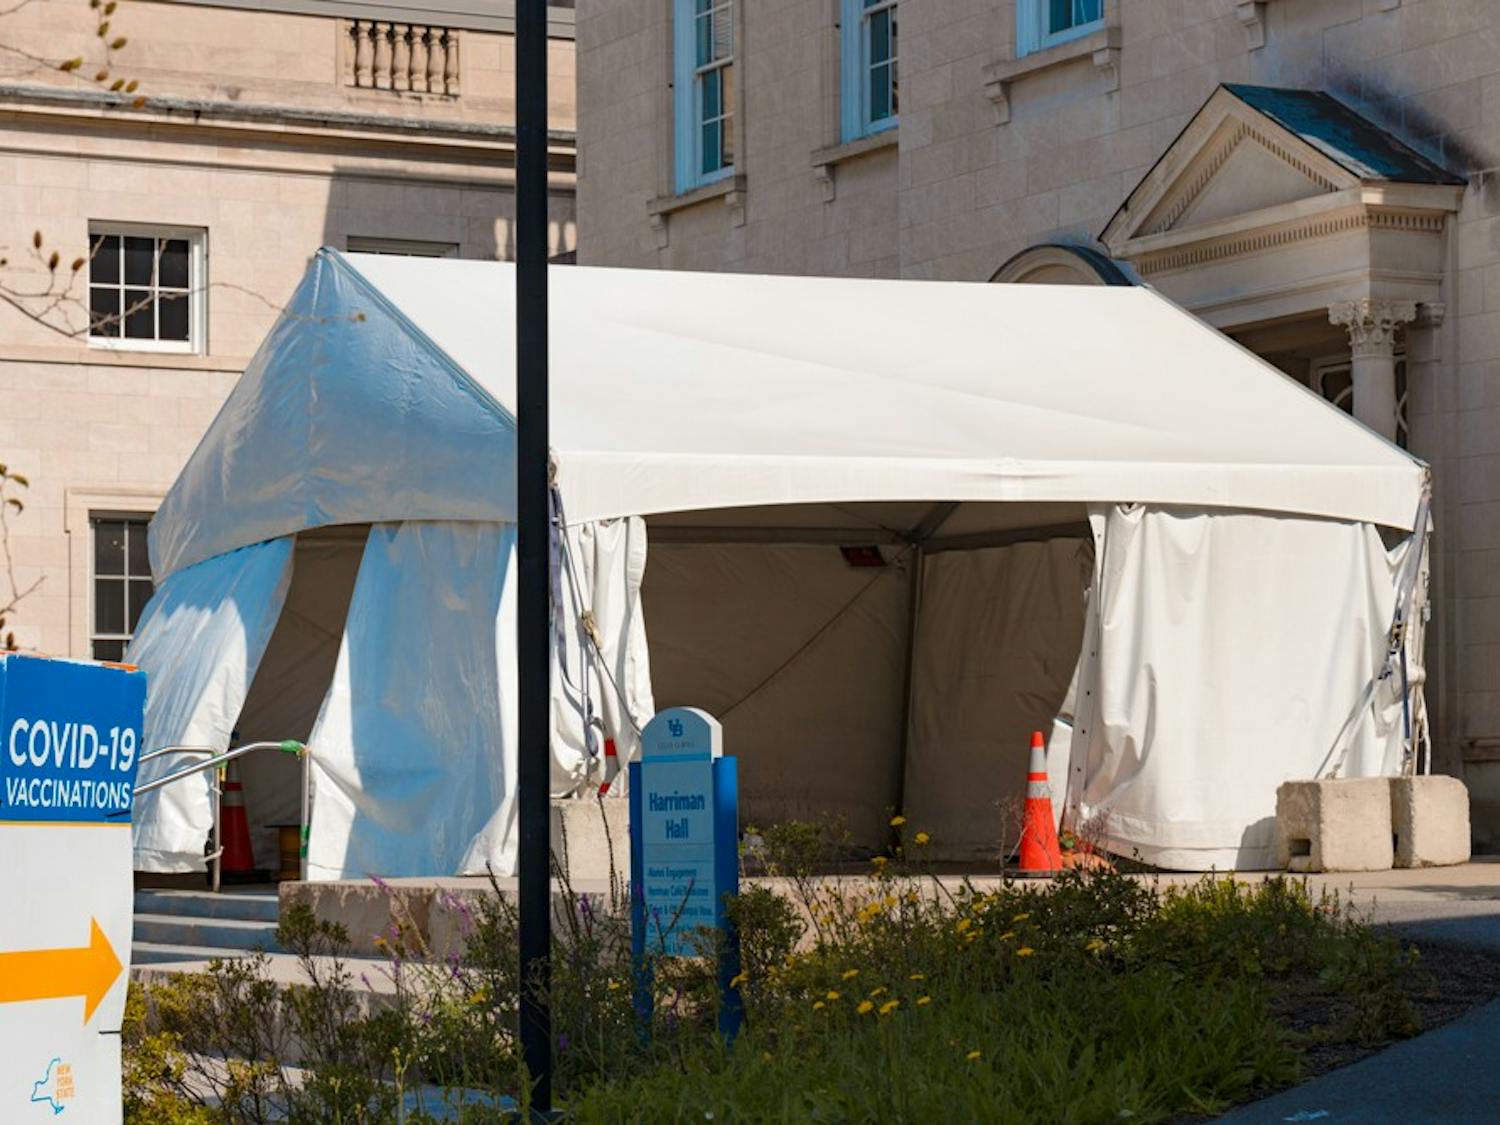 The COVID-19 vaccination site located at South Campus' Harriman Hall.